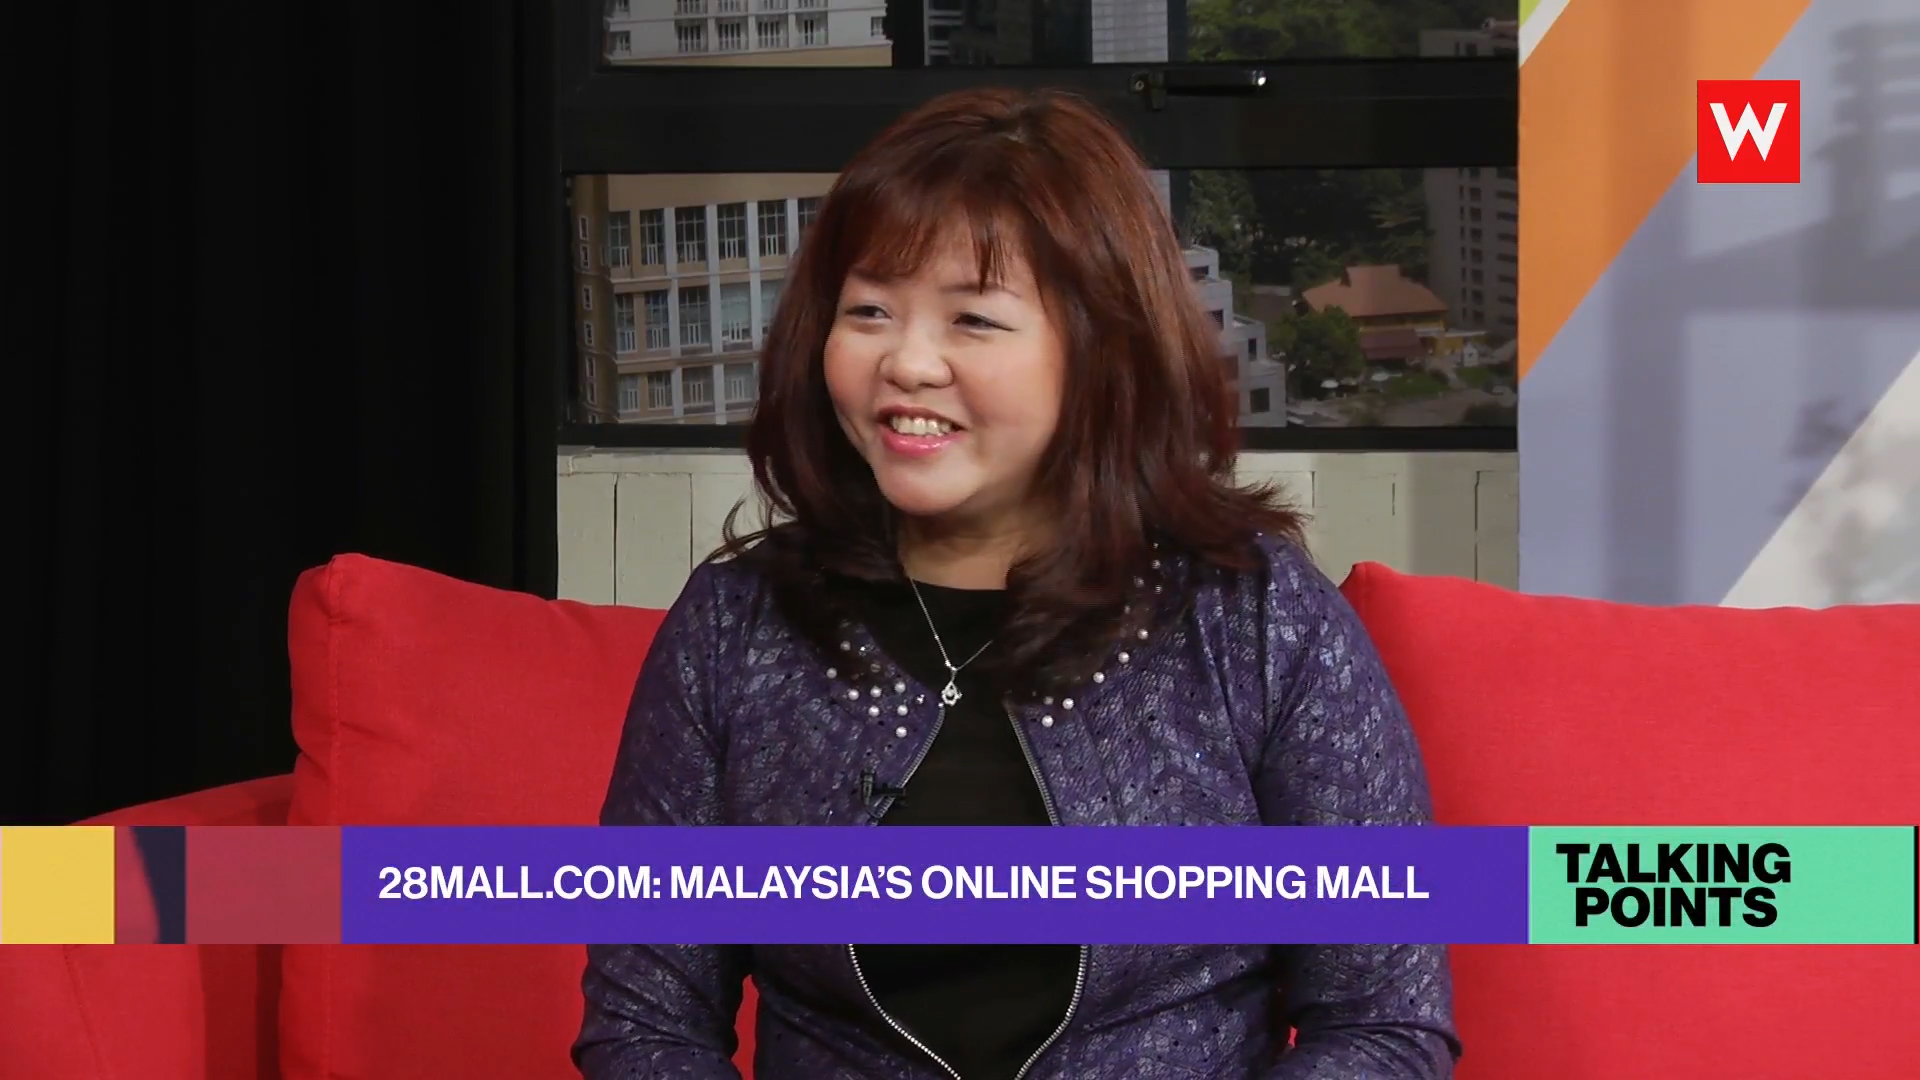 Channel W Interview 28Mall.com Online Shopping Mall